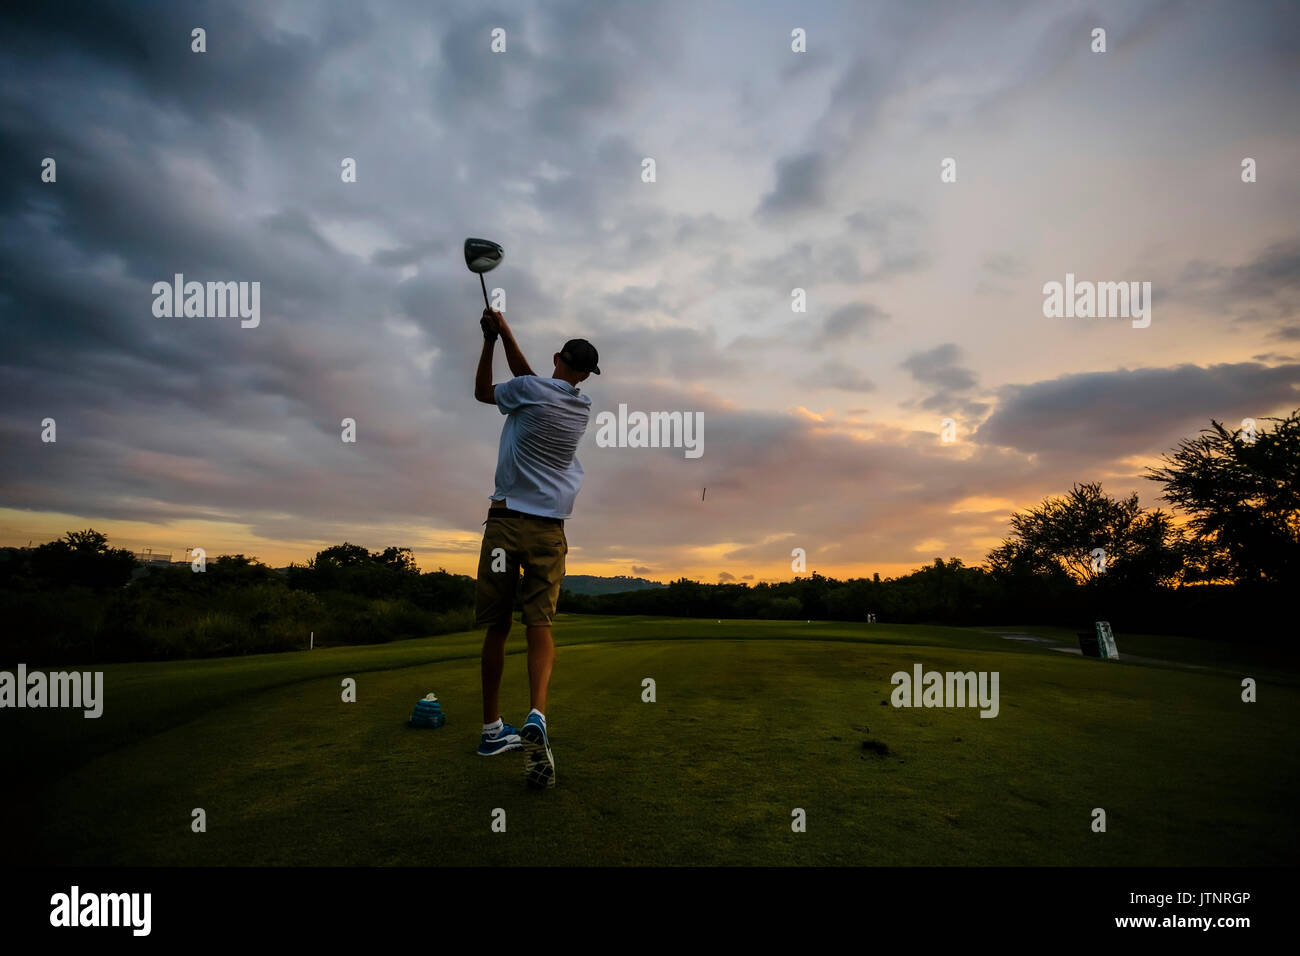 Golf player at sunset time,Bali,Indonesia Stock Photo